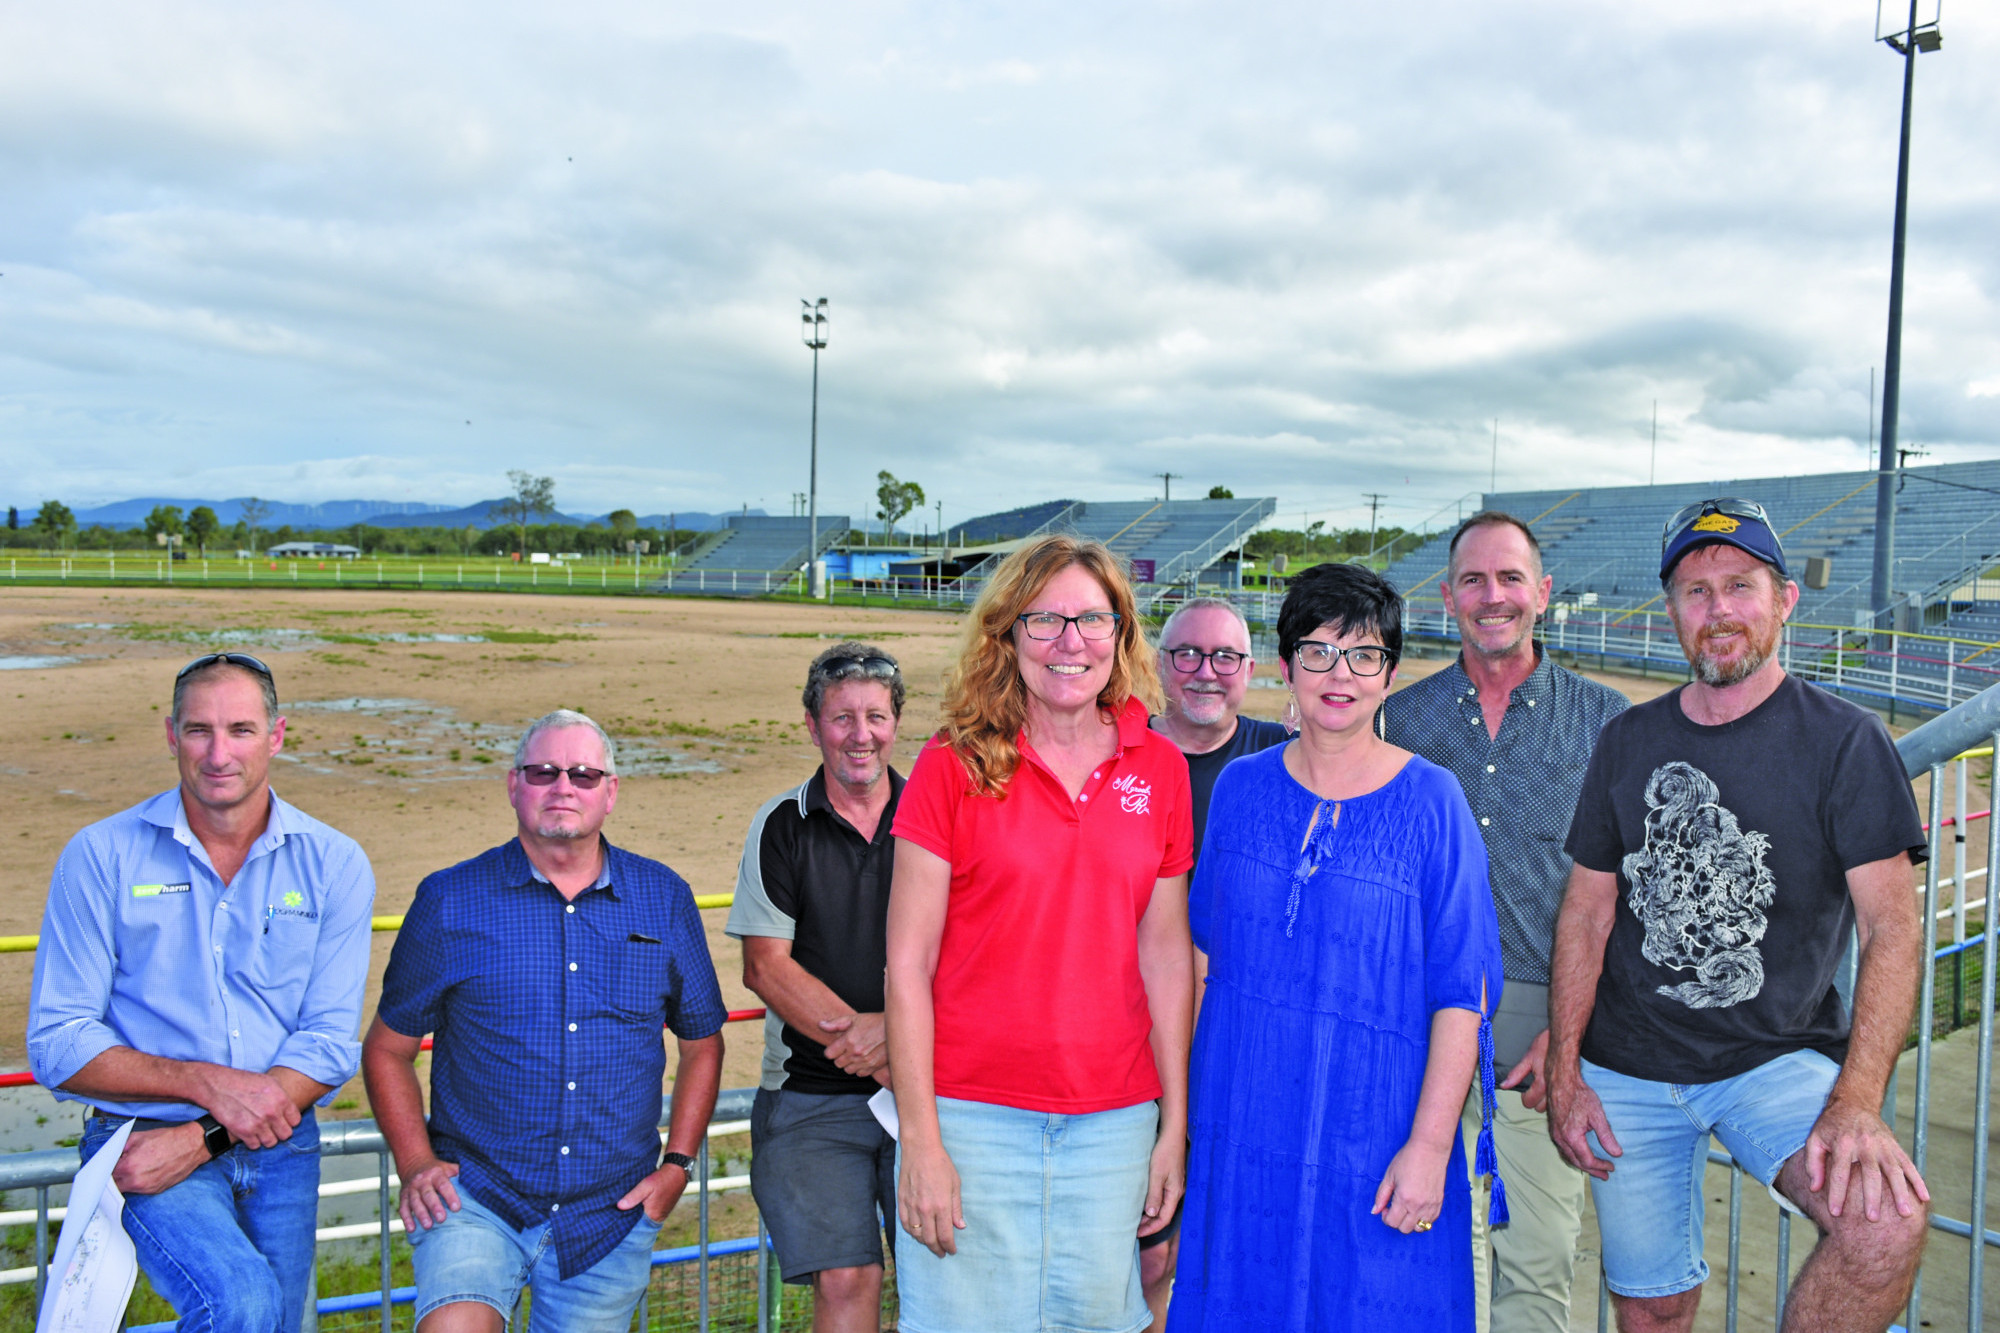 Savannah in the Round promoters met with Mareeba rodeo officials to continue to plan aspects of this year’s October country music festival at Kerribee Park.